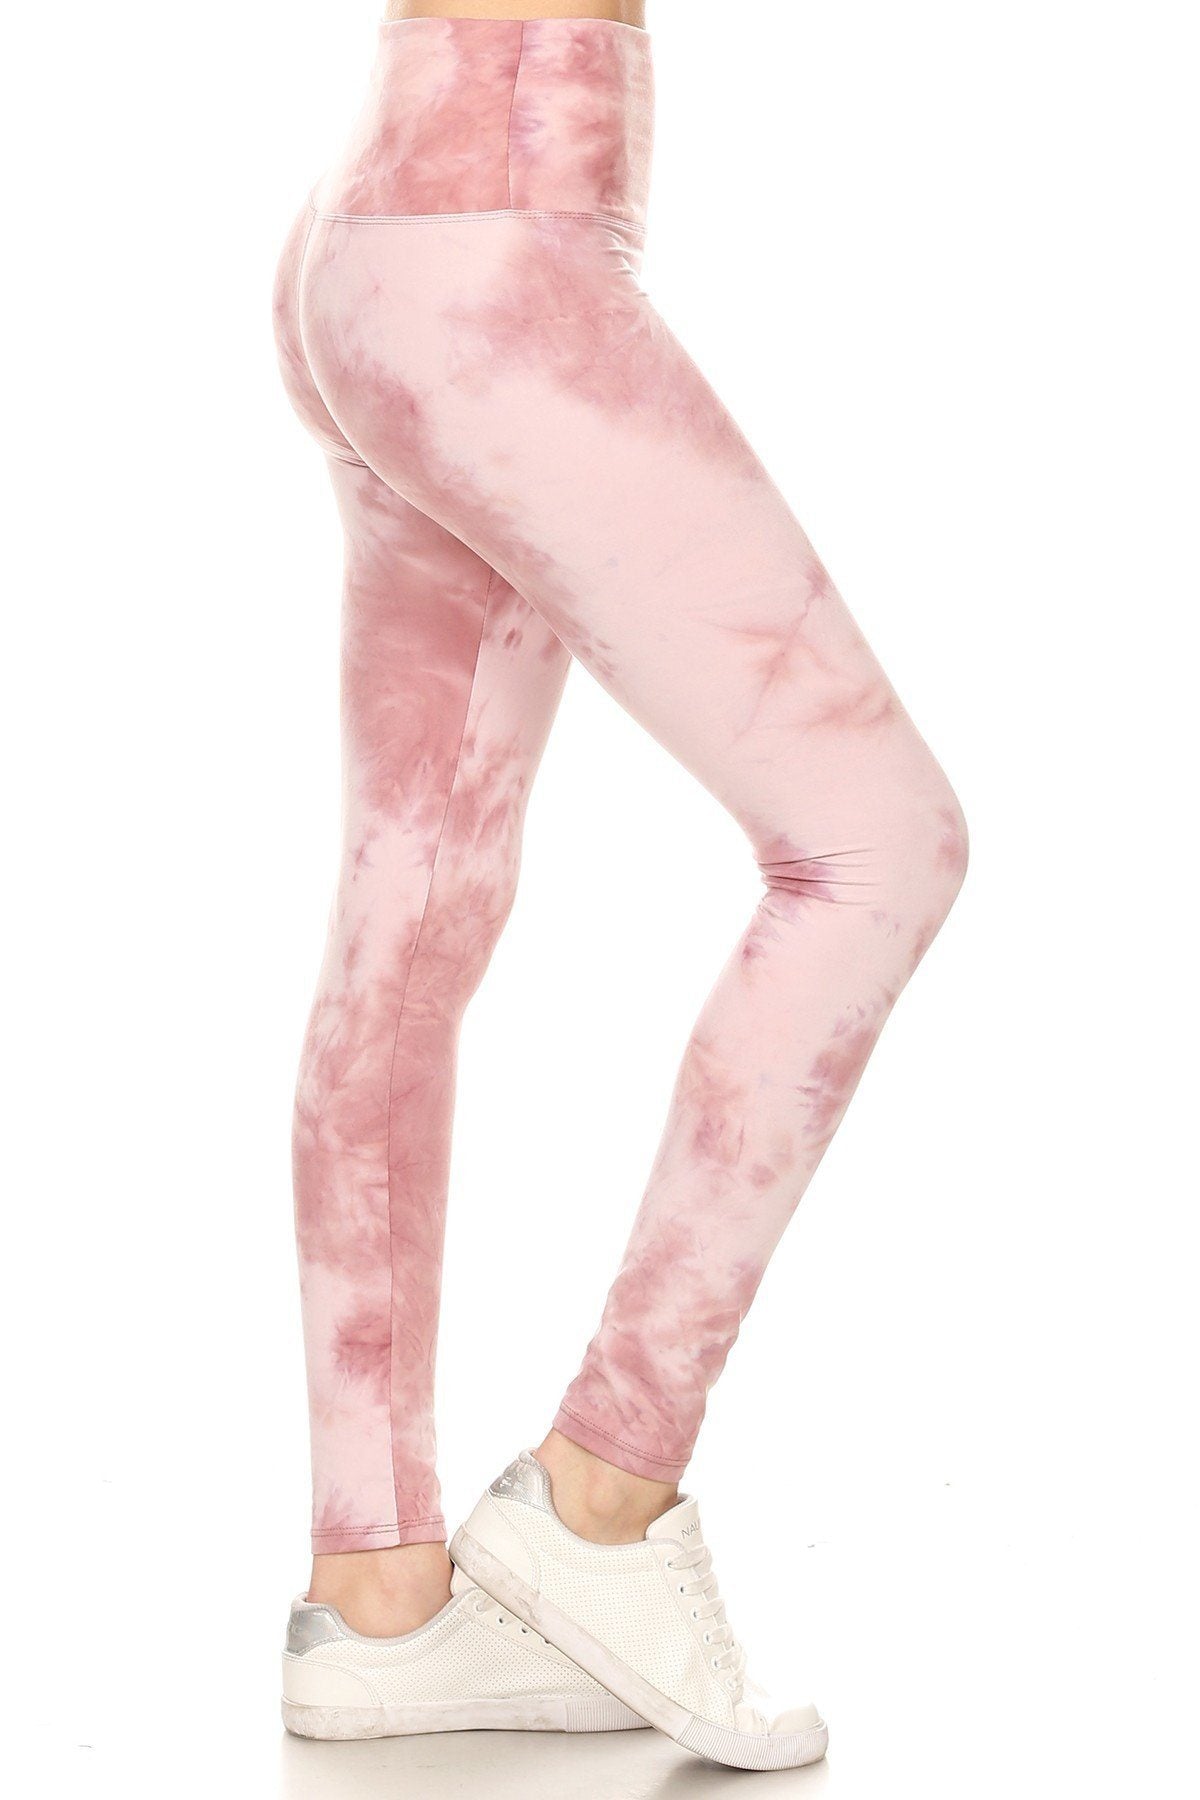 5-inch Long Yoga Style Banded Lined Tie Dye Printed Knit Legging With High Waist. - Fashion Quality Boutik